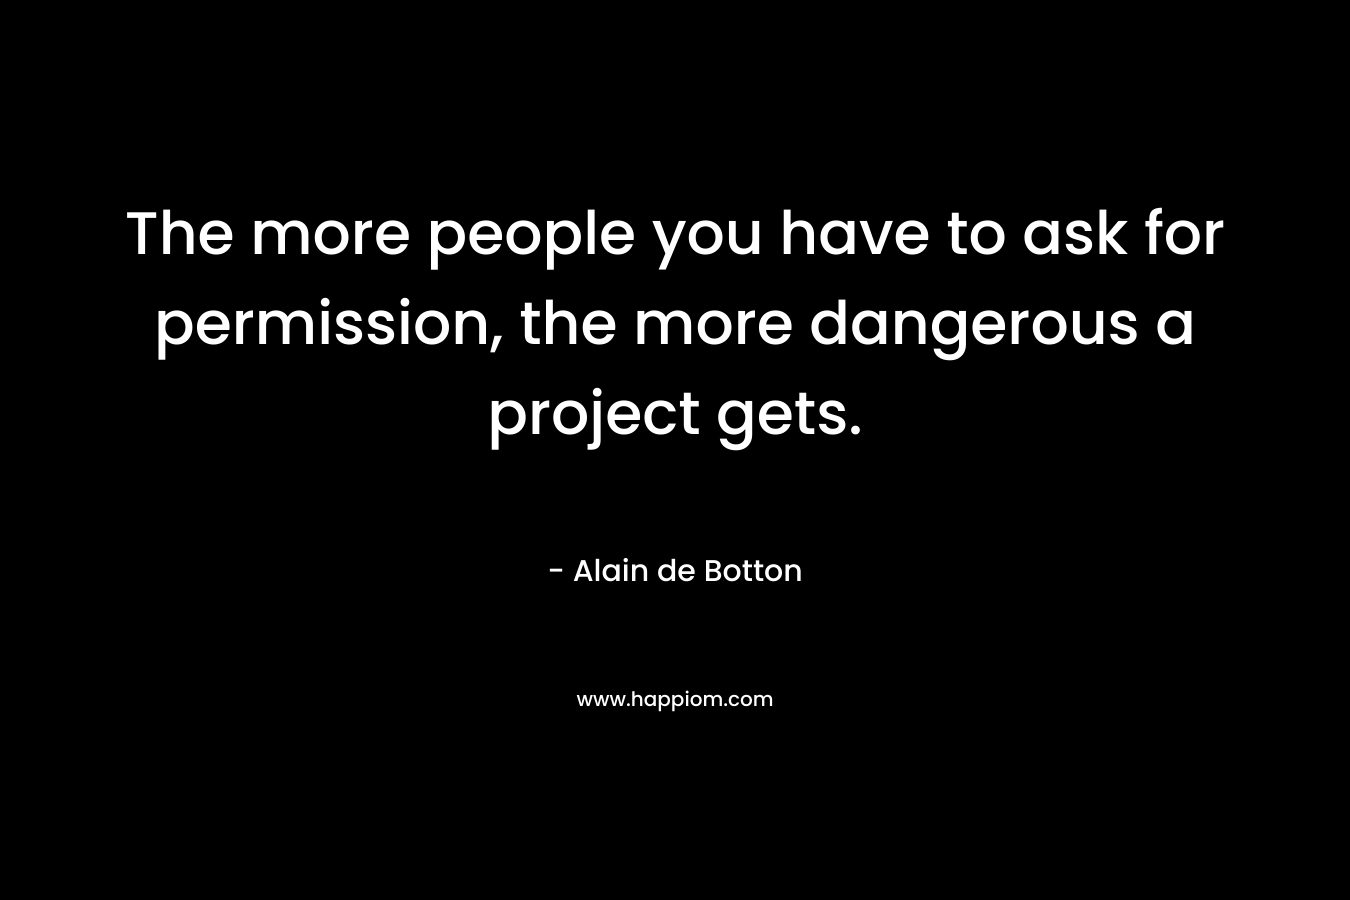 The more people you have to ask for permission, the more dangerous a project gets. – Alain de Botton